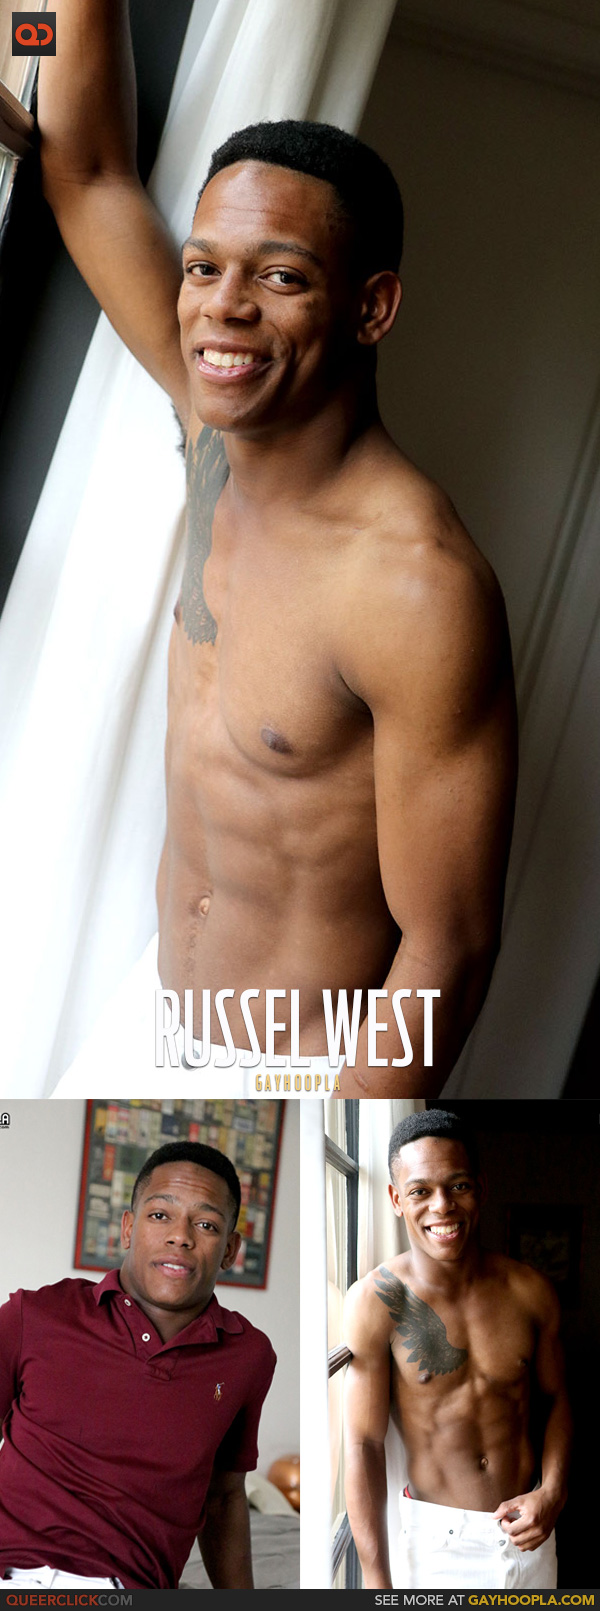 Gayhoopla: Russell West